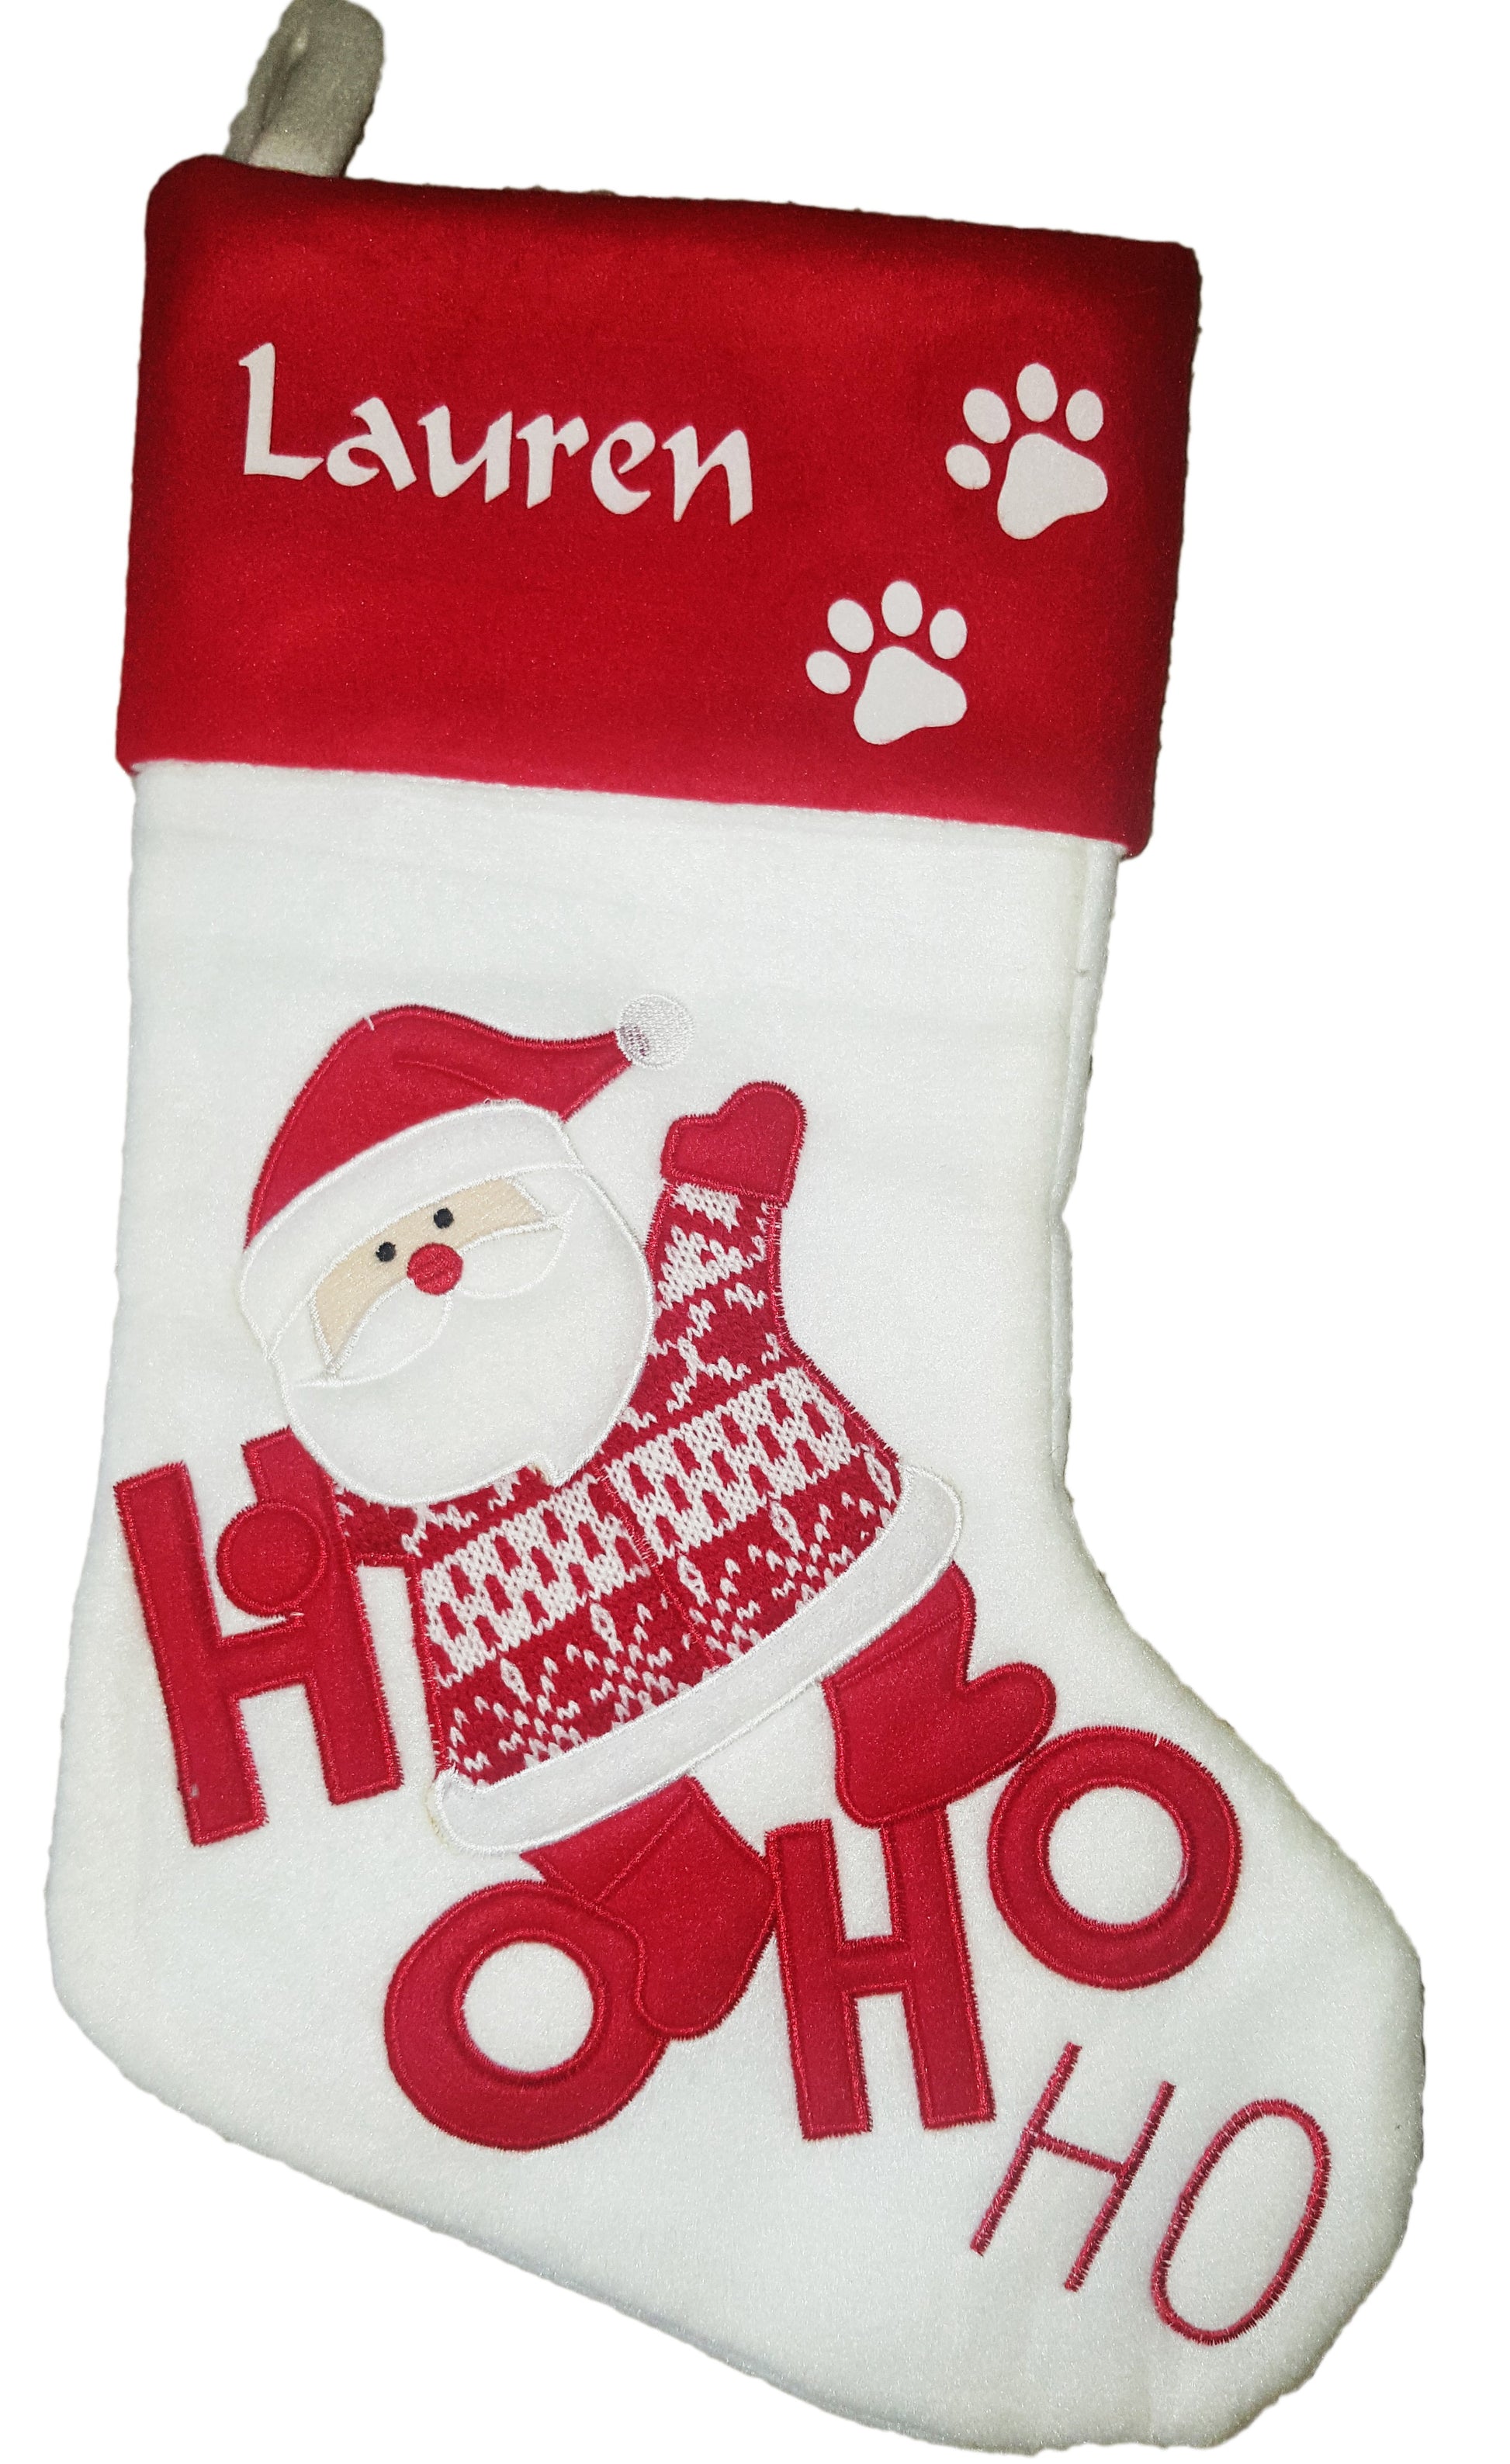 Personalised Christmas stocking - HO HO. The CPS Warehouse